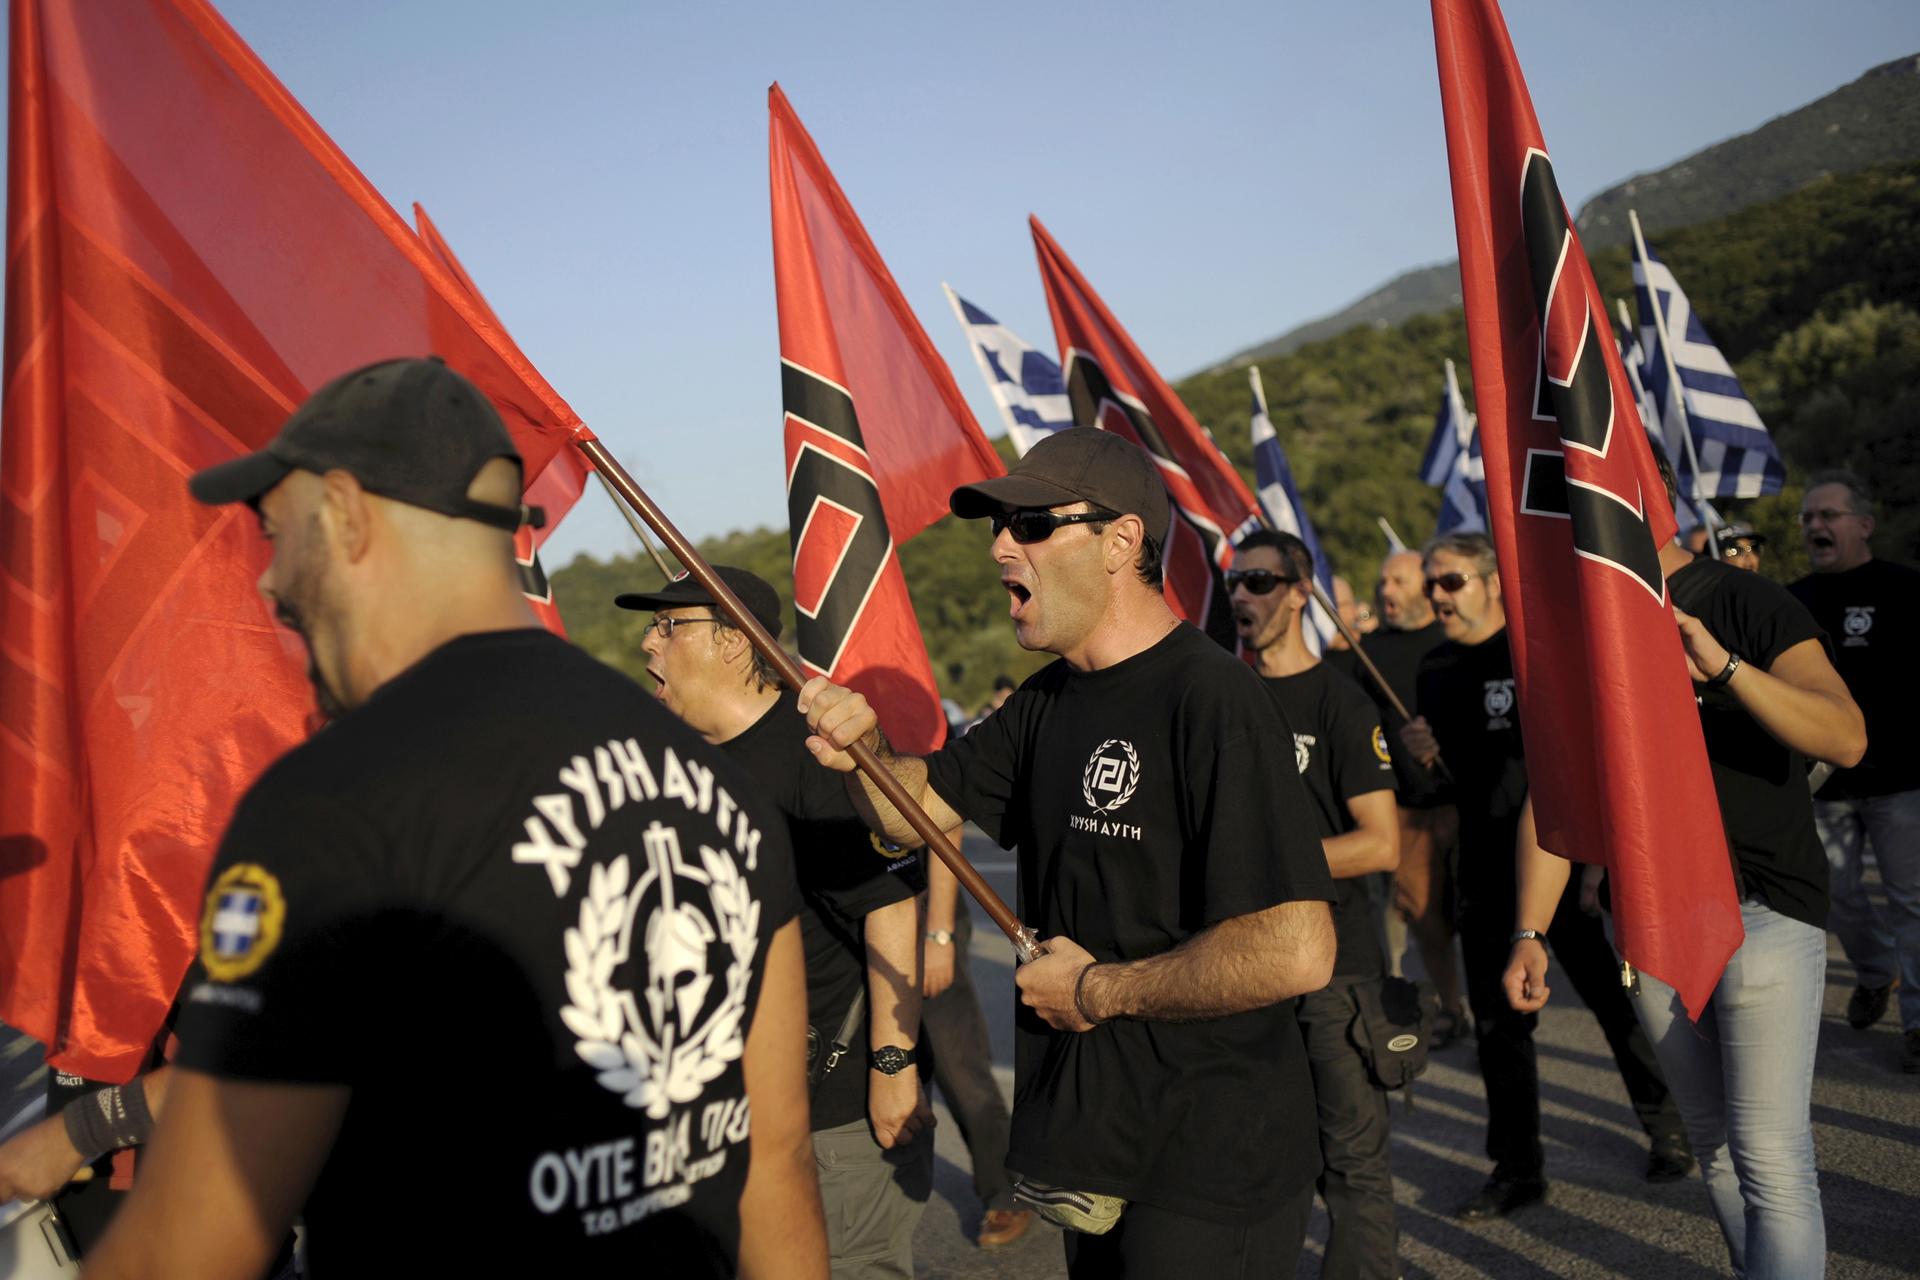 Golden Dawn supporters prepare for a rally in Thermopylae, outside Athens, Greece, Sept. 5, 2015.